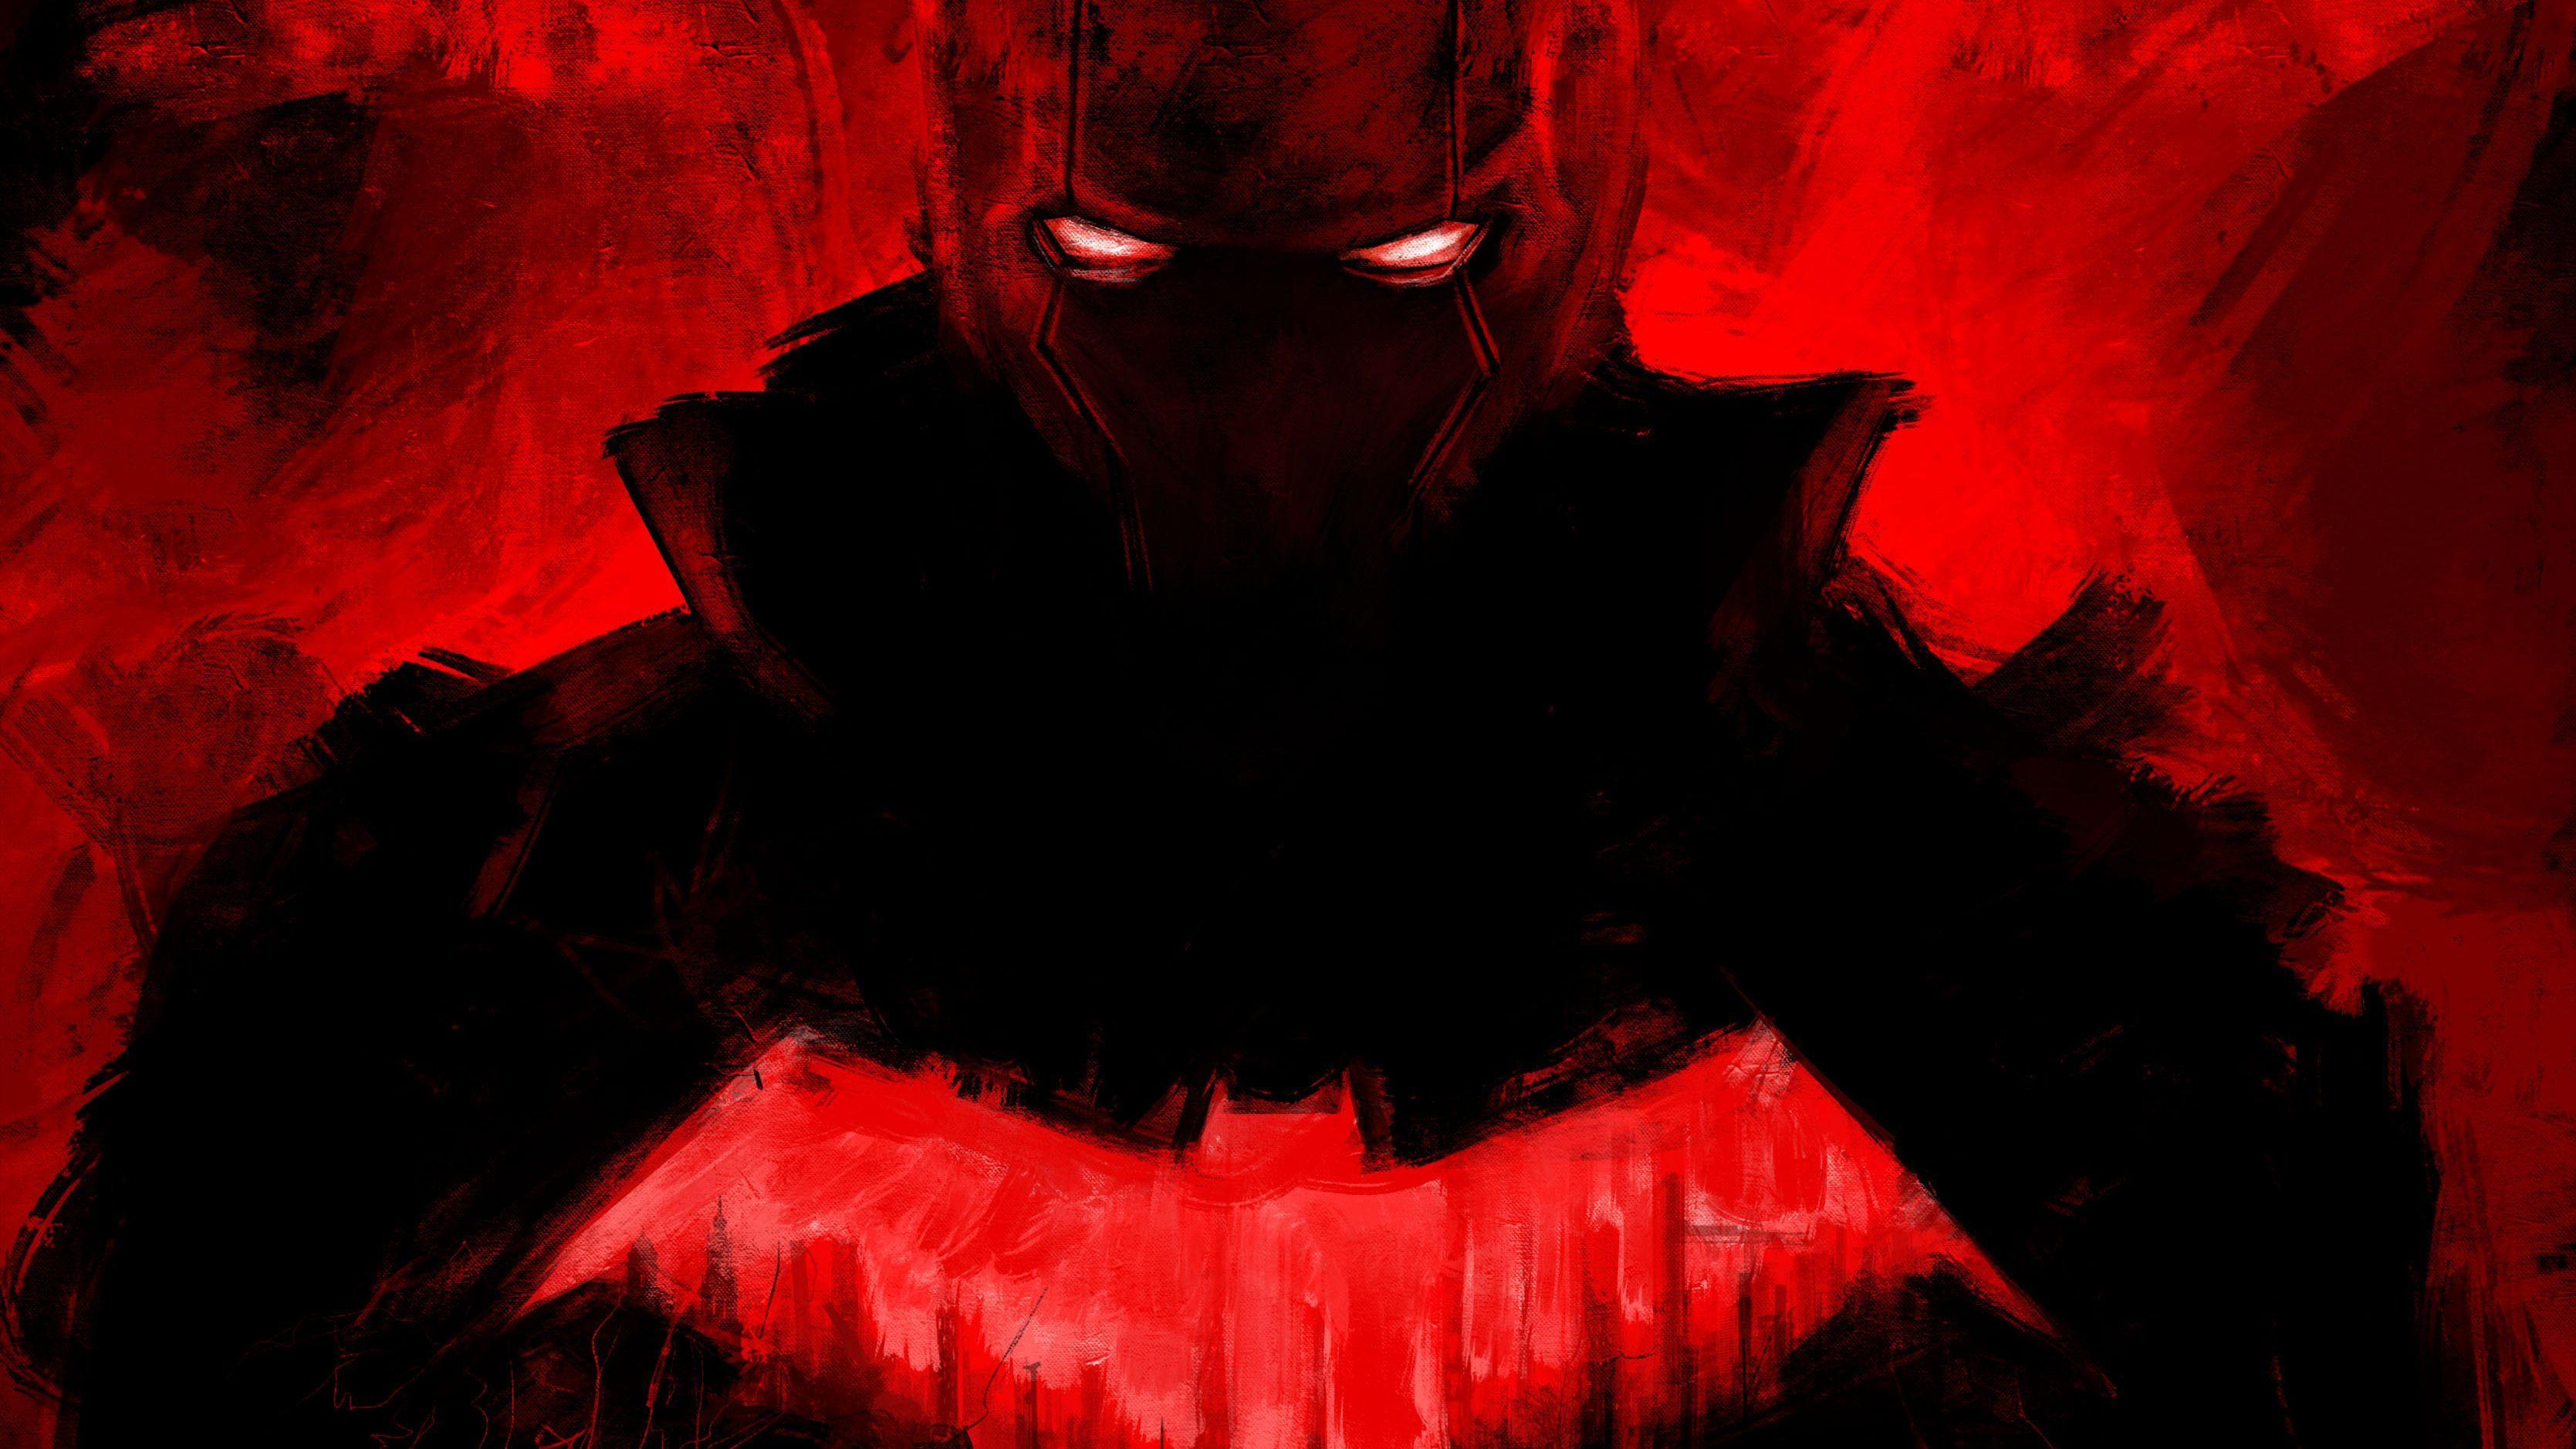 Red Hood Cool Wallpapers - Top Free Red Hood Cool Backgrounds